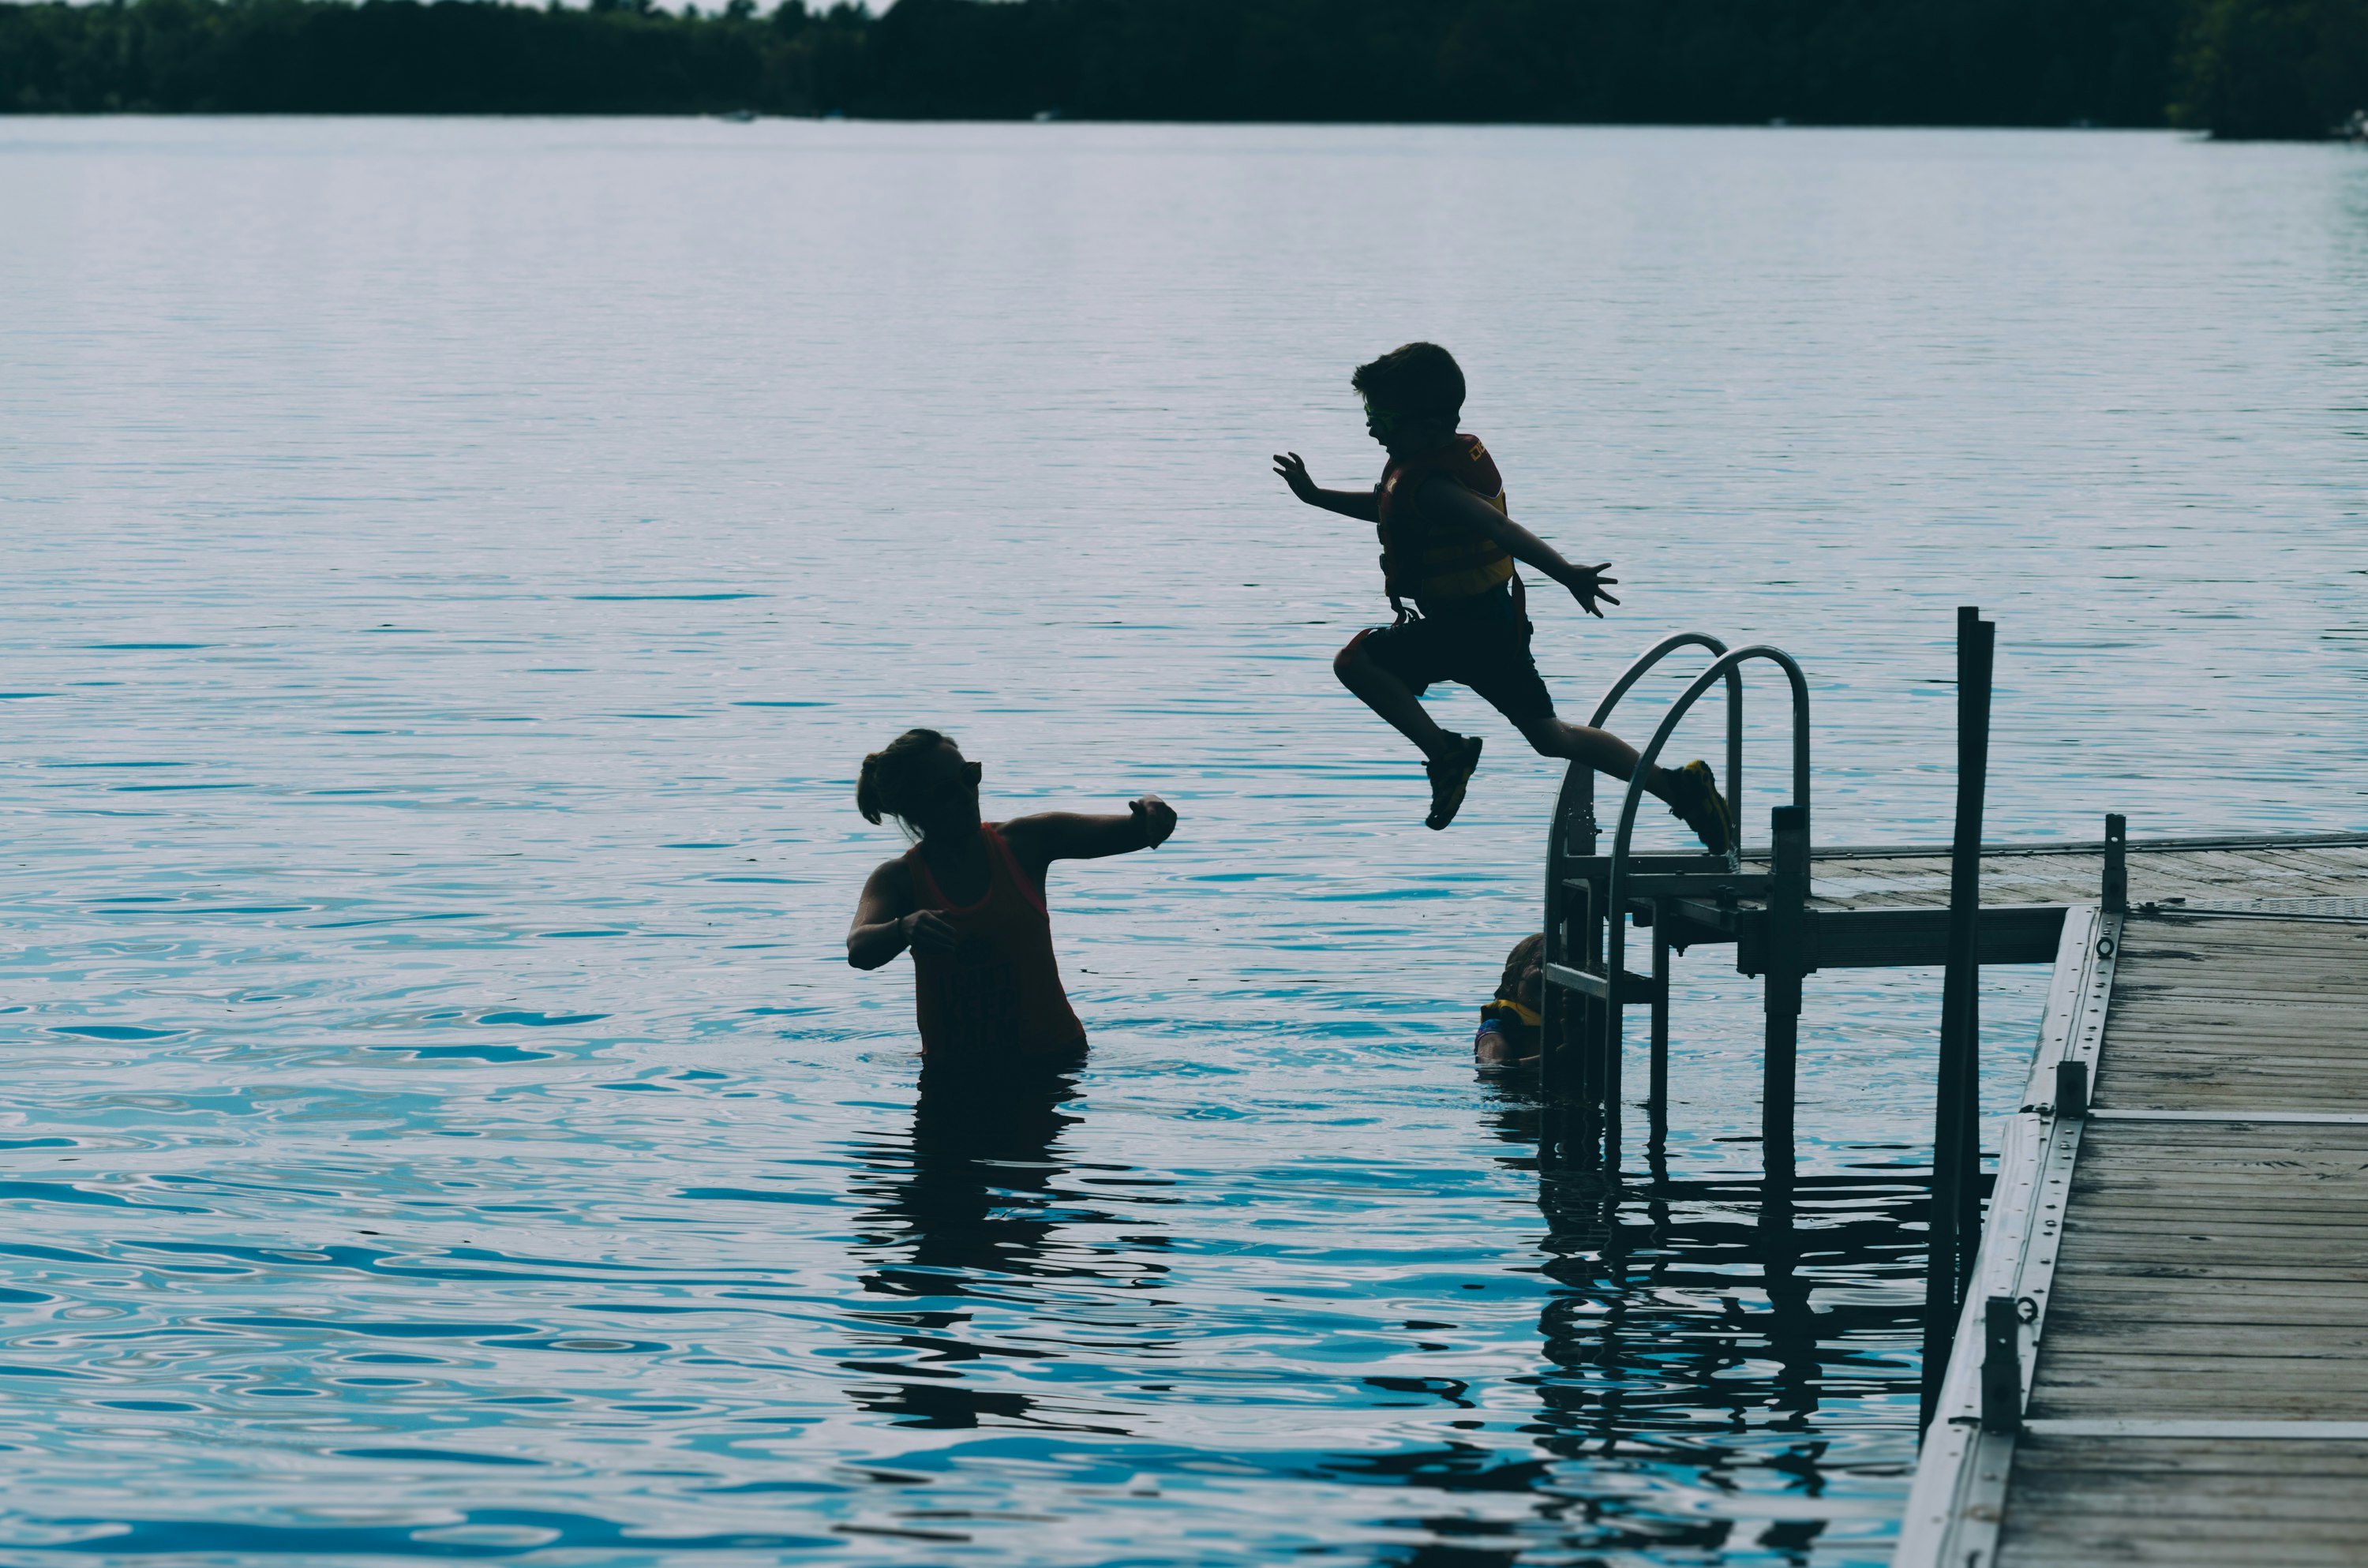 photography of boy jumping on body of water during daytime